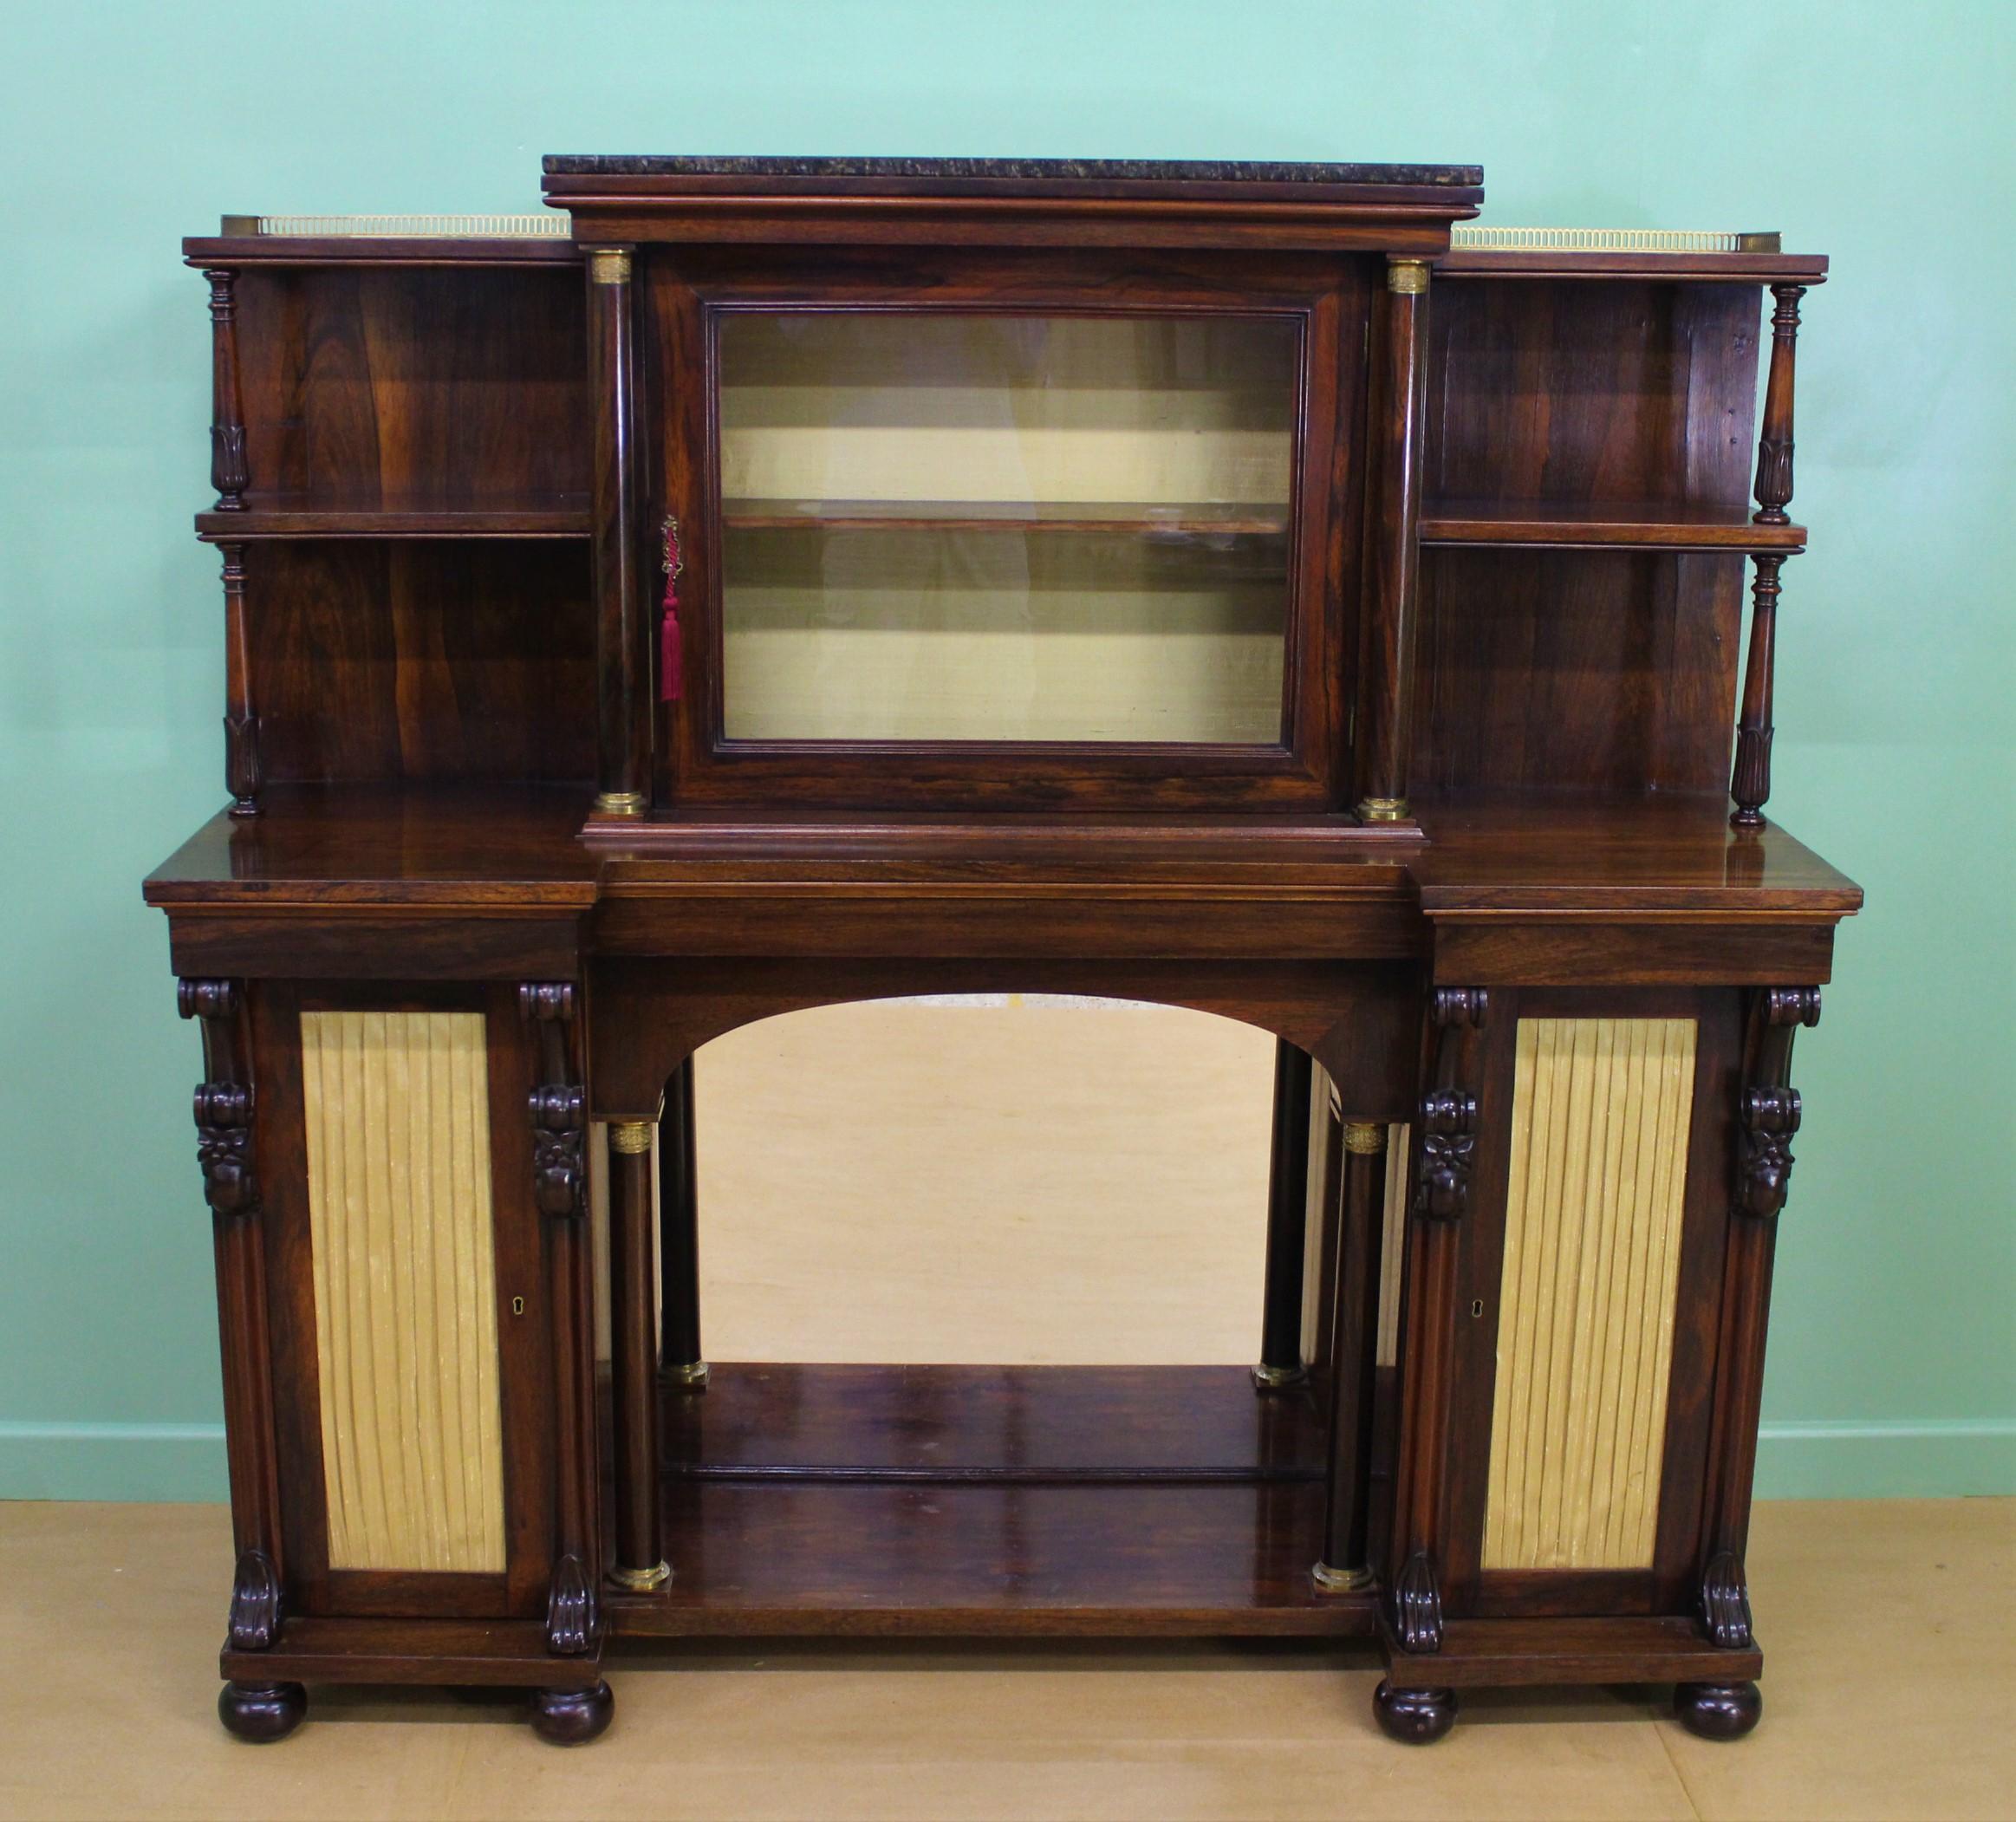 A splendid late Regency period rosewood chiffonier or side cabinet. Of excellent construction in solid rosewood with attractive rosewood veneers onto a mahogany carcas. The top section with a single glazed door (lockable with key supplied) which